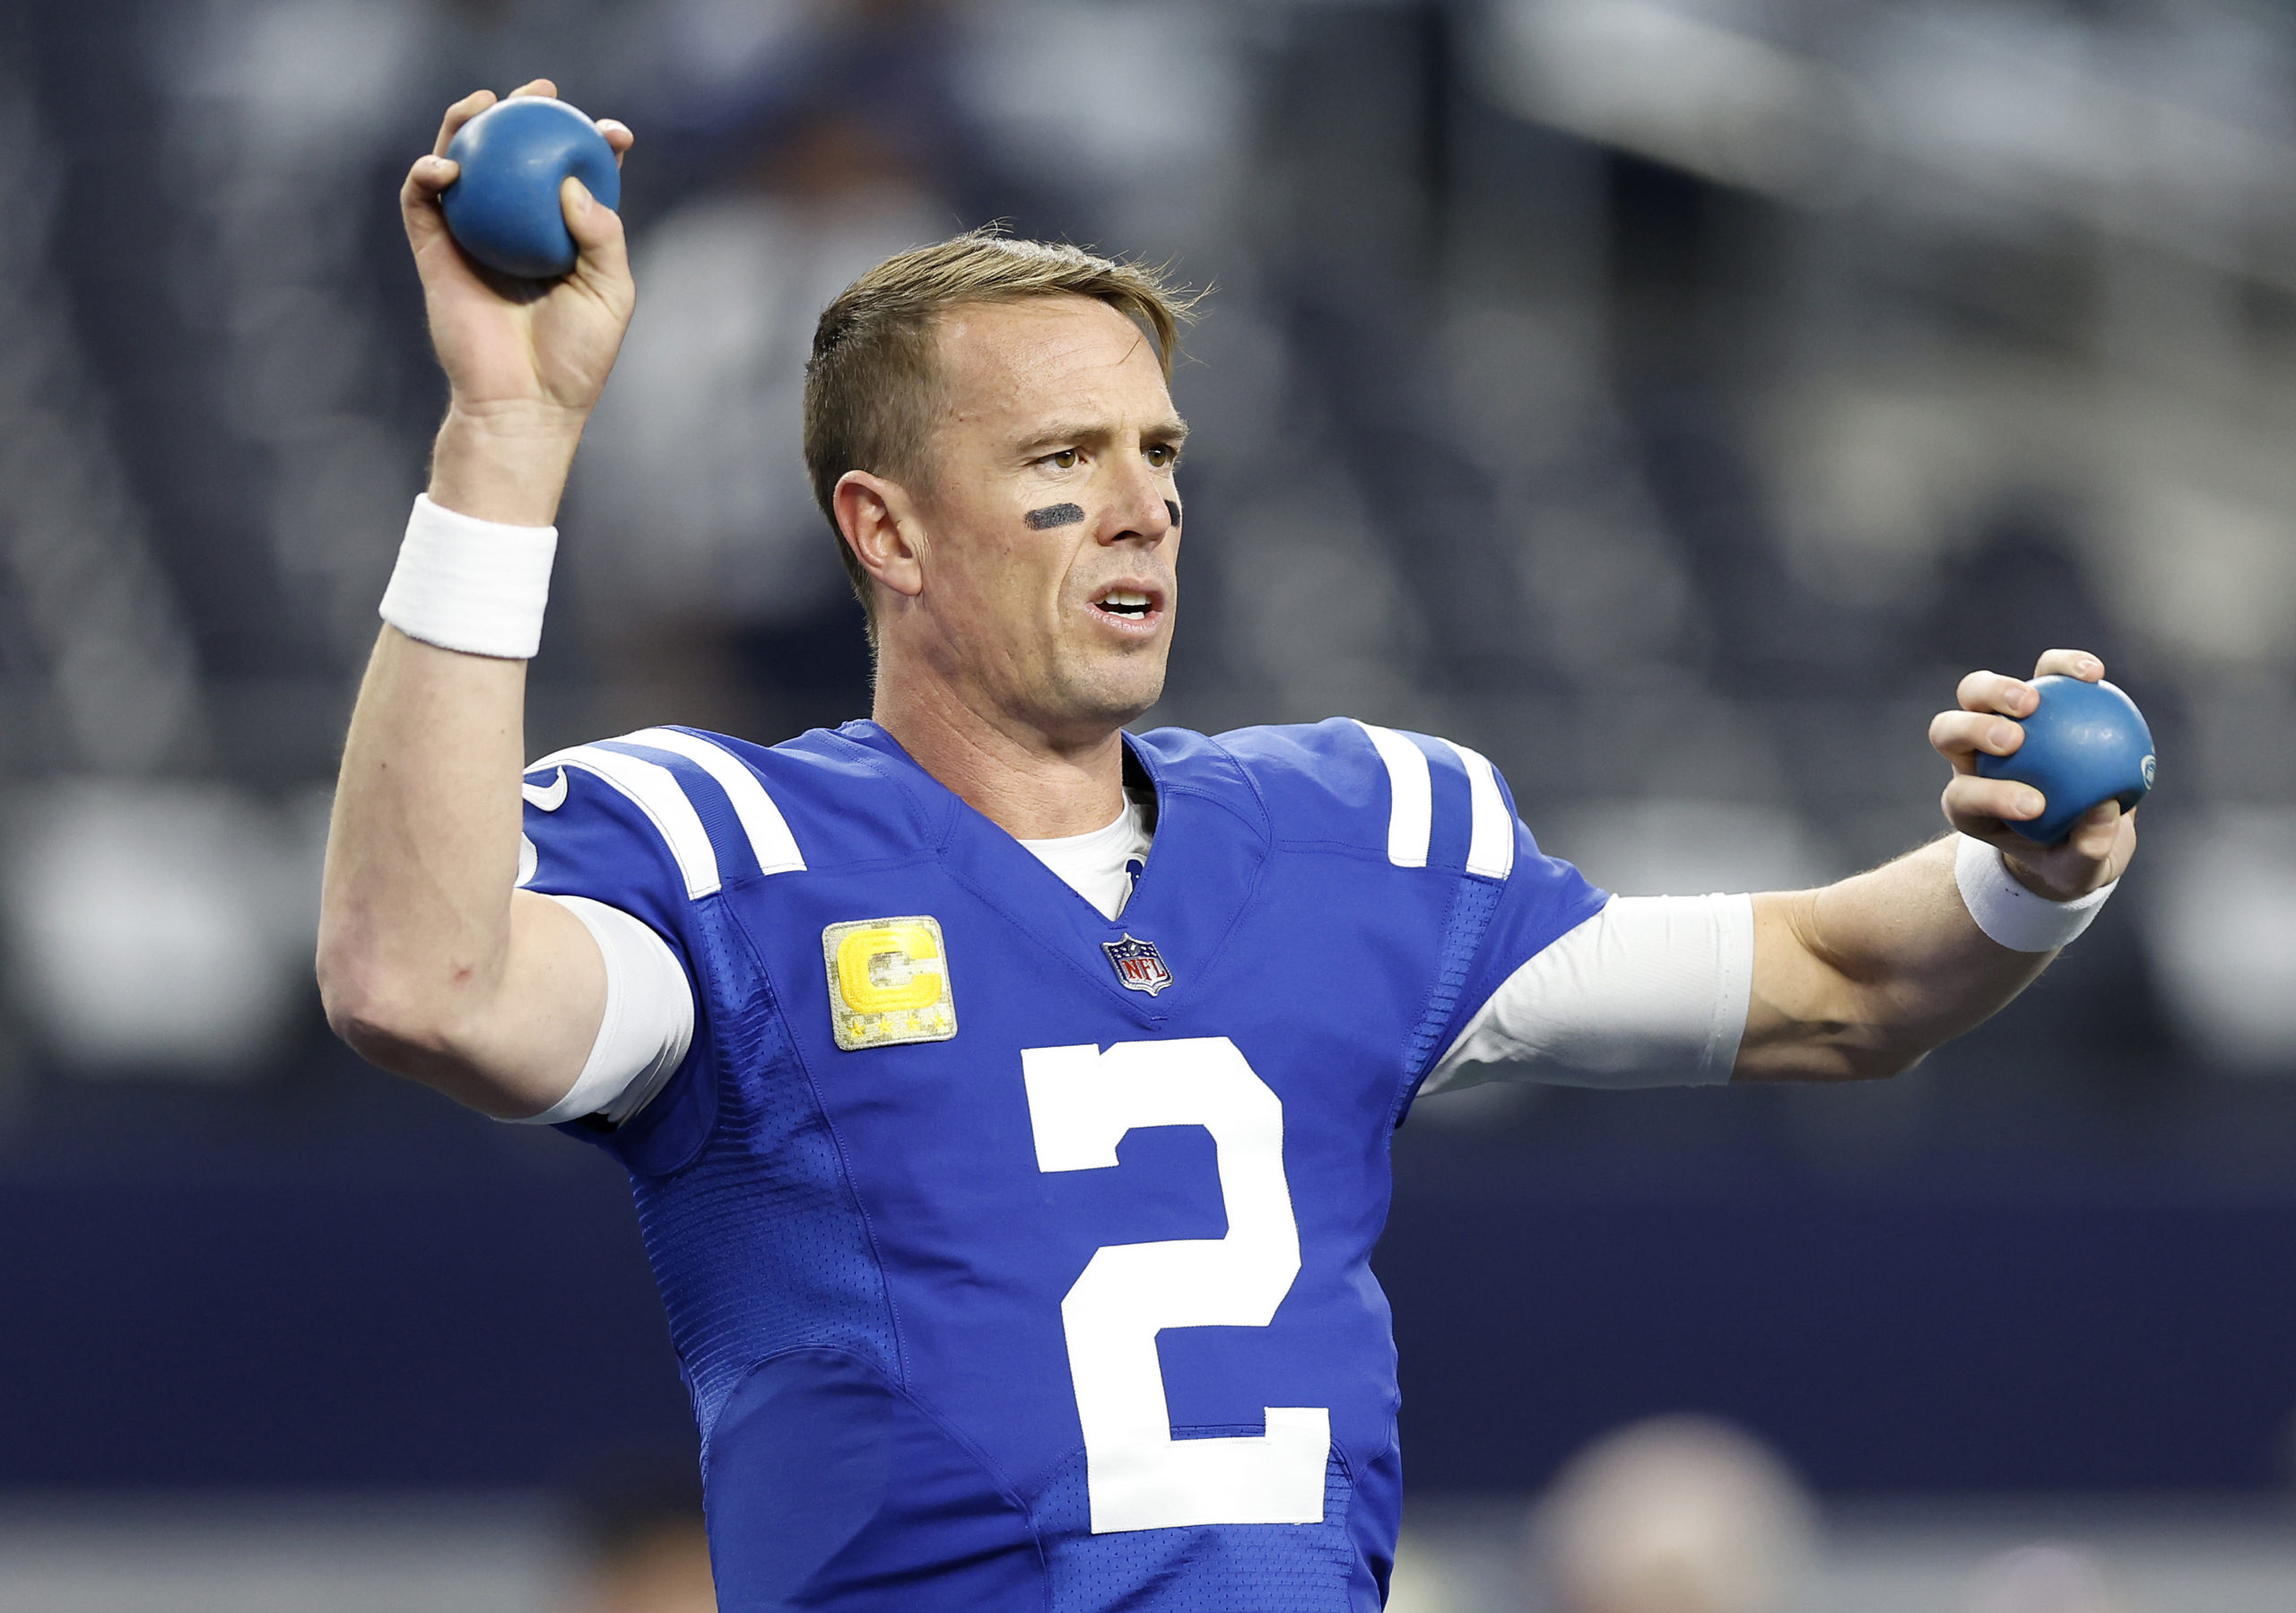 ARLINGTON, TEXAS - DECEMBER 04: Matt Ryan #2 of the Indianapolis Colts warms up prior to a game against the Dallas Cowboys at AT&T Stadium on December 04, 2022 in Arlington, Texas. Wesley Hitt/Getty Images